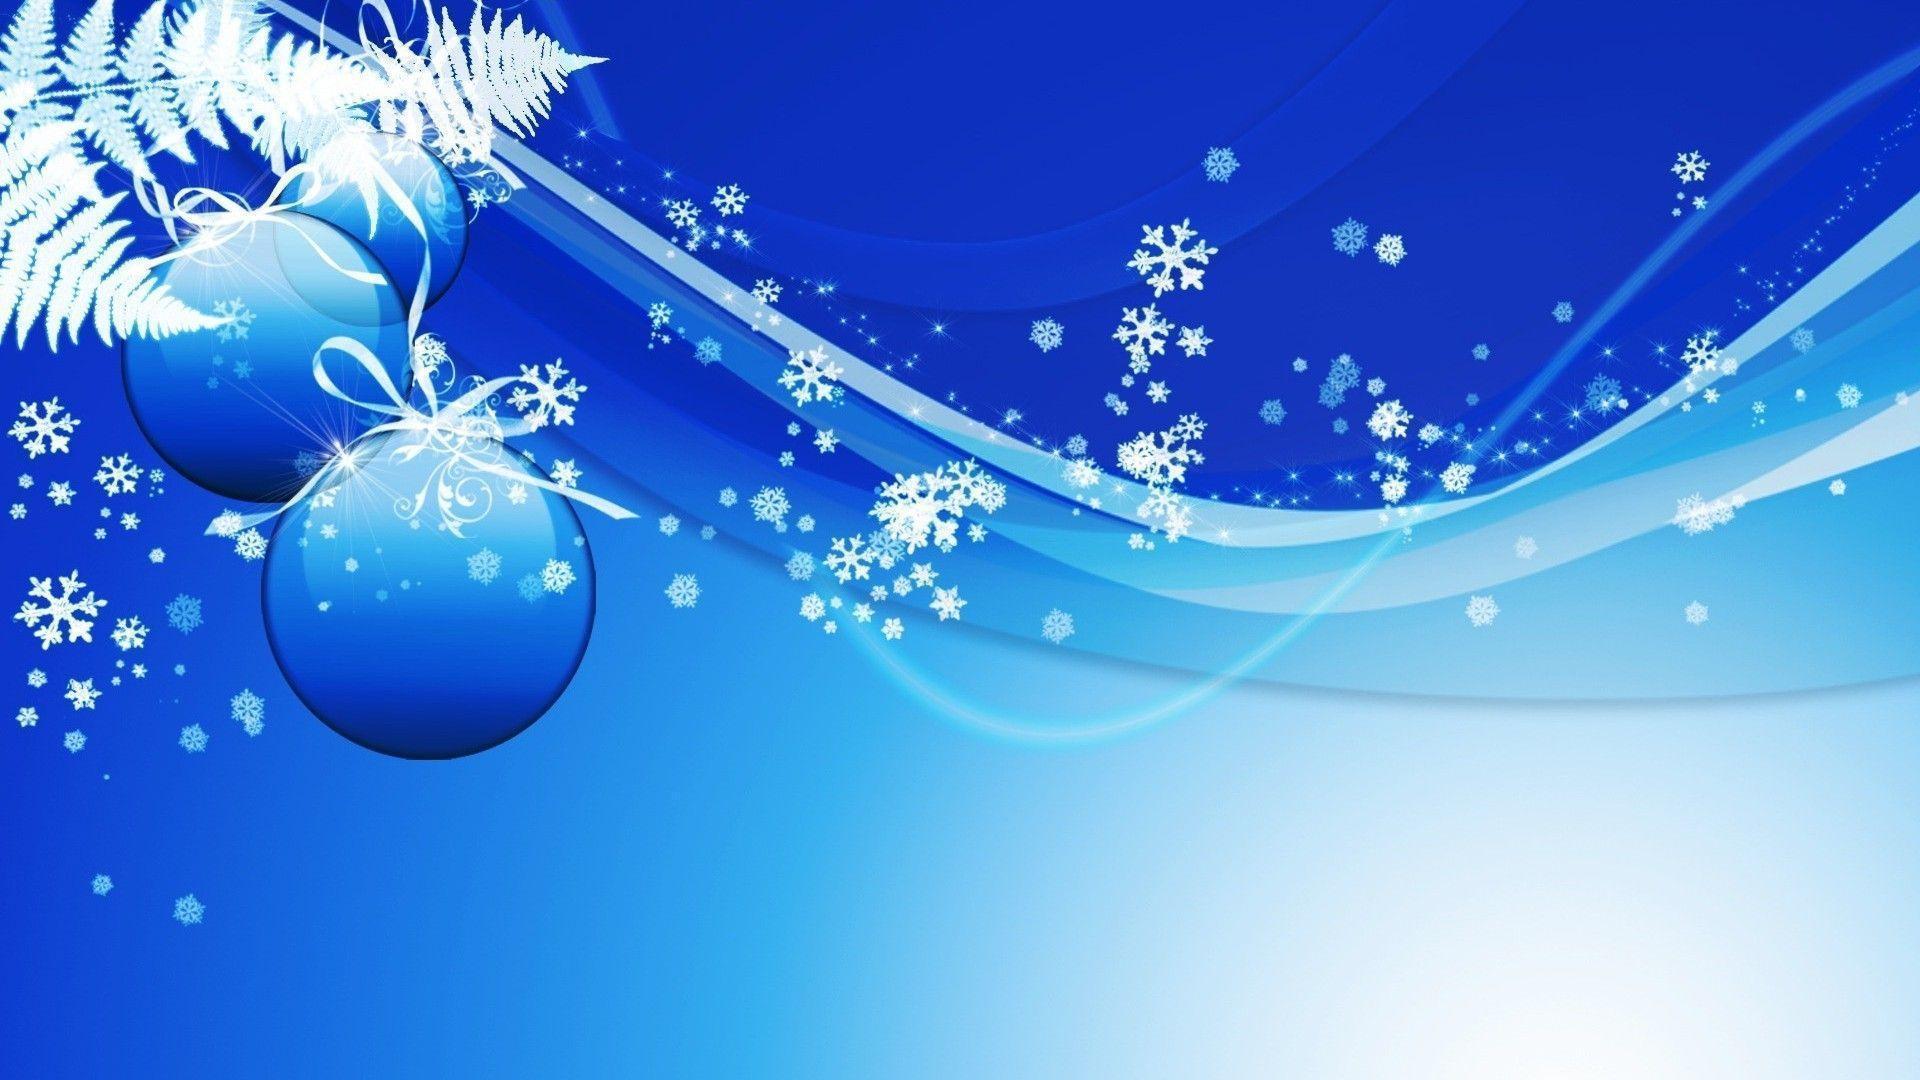 Wallpaper For > Snowflakes Background